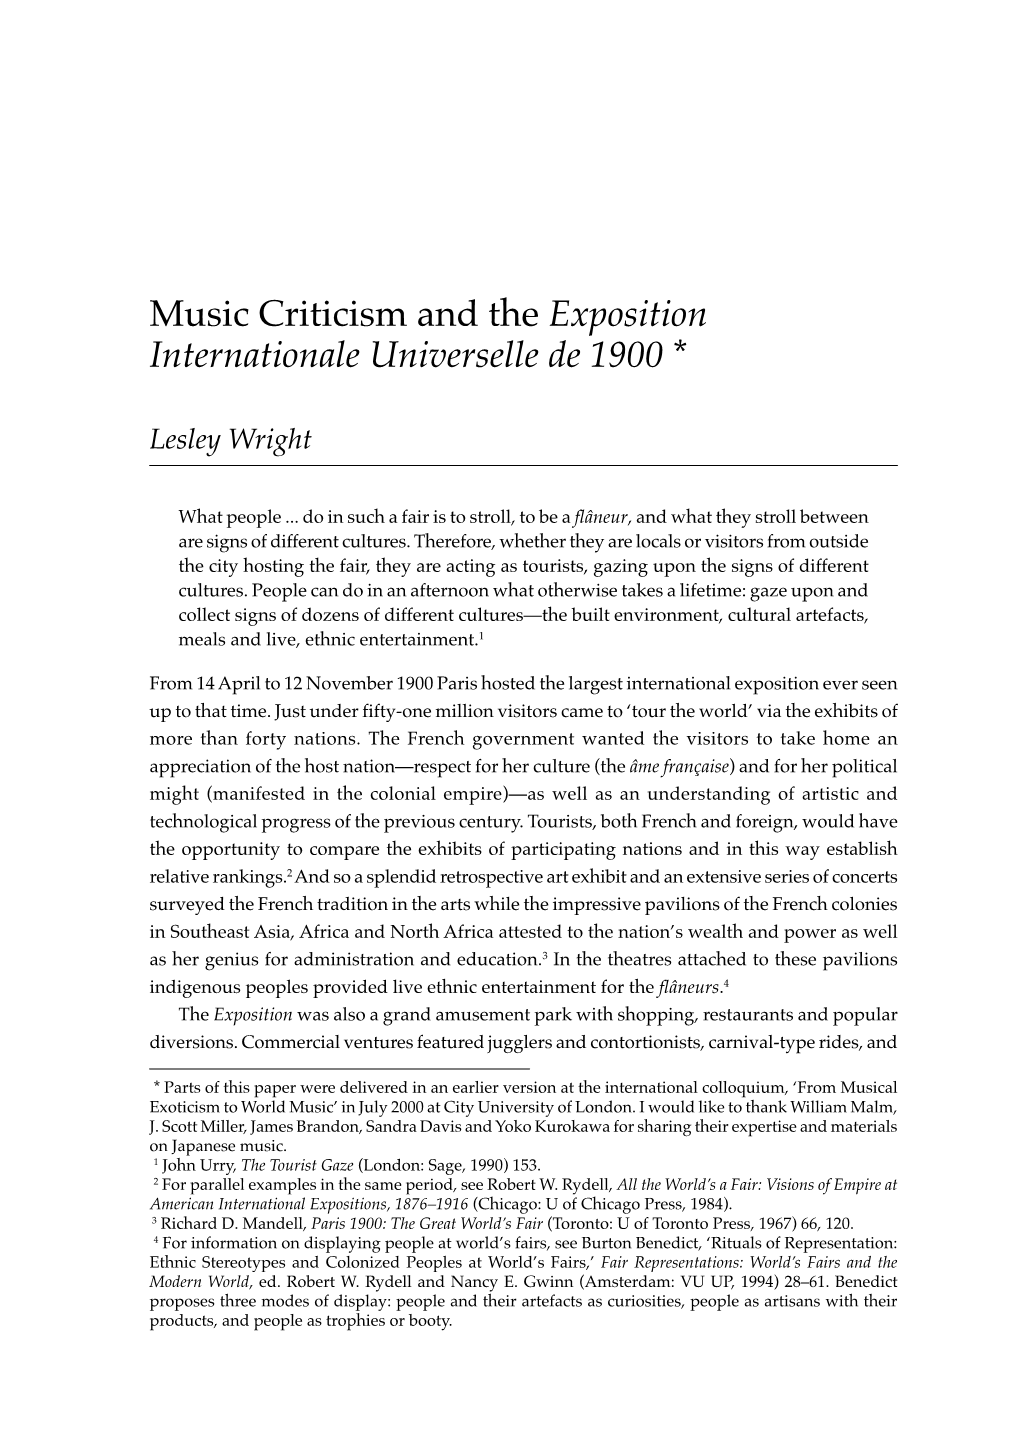 Music Criticism and the Exposition Internationale Universelle De 1900 *